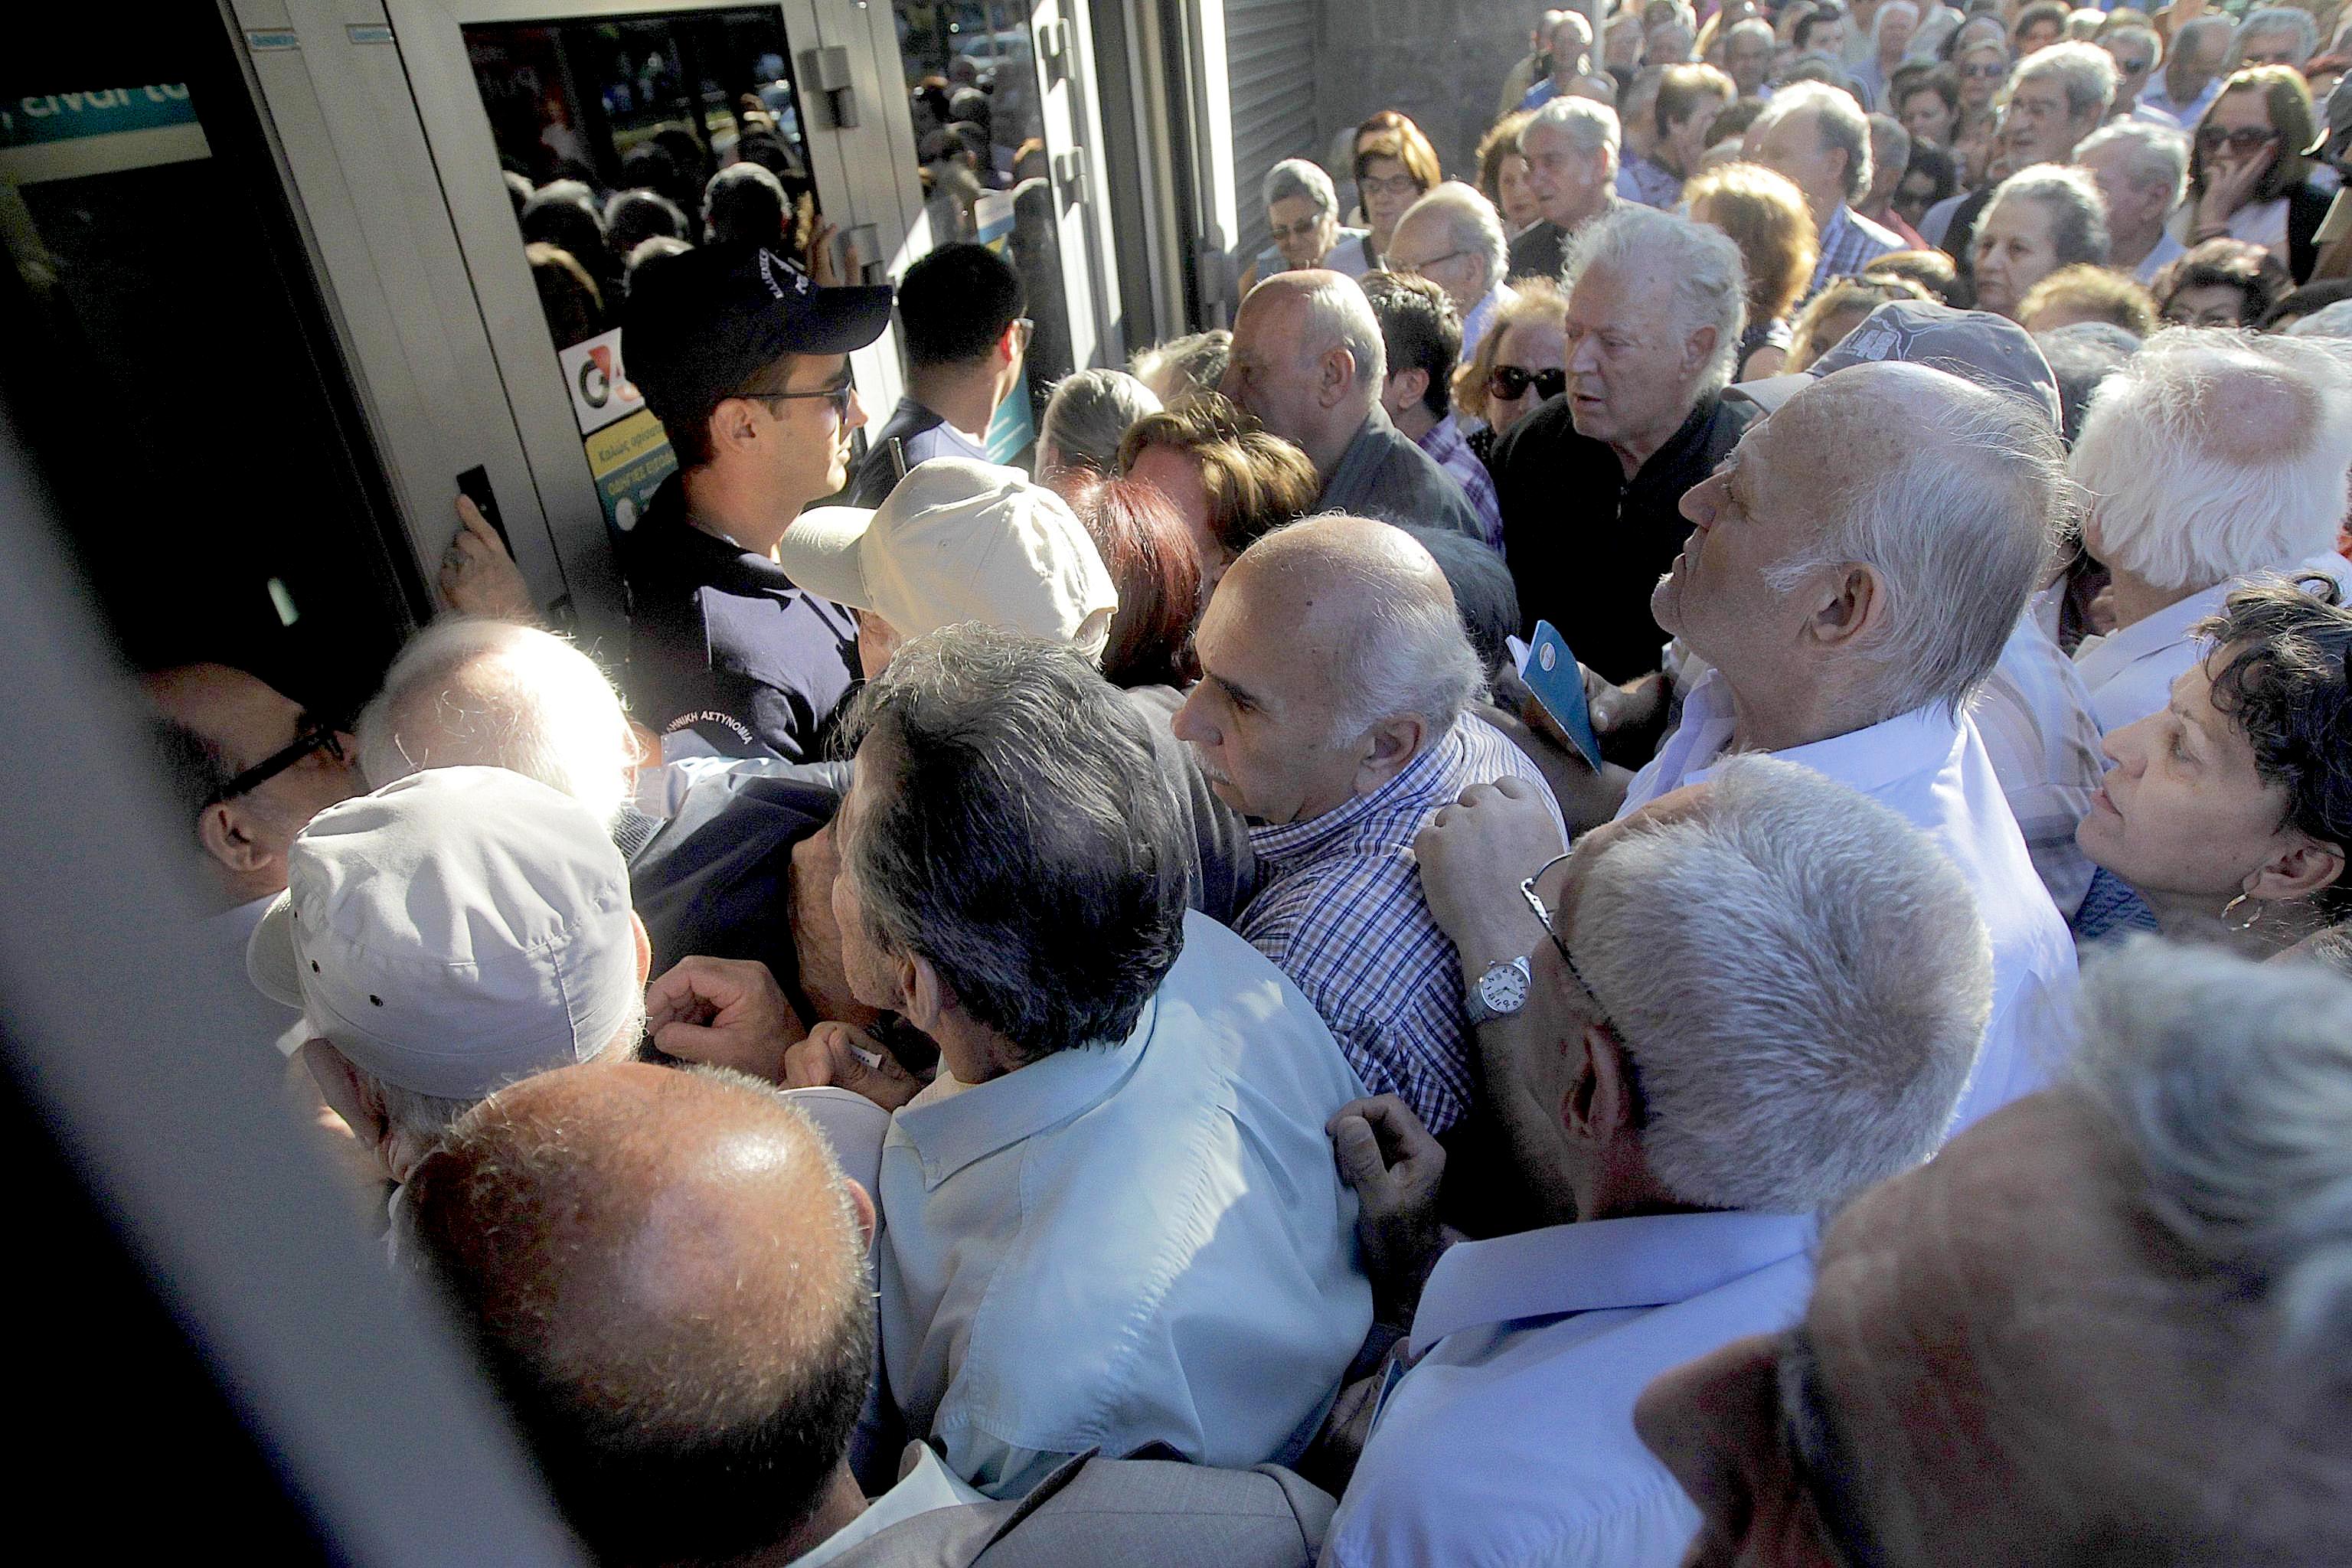 Pensioners who do not own ATM cards line up outside a bank branch to withdraw part of their pensions as a result of capital controls imposed by the Greek government